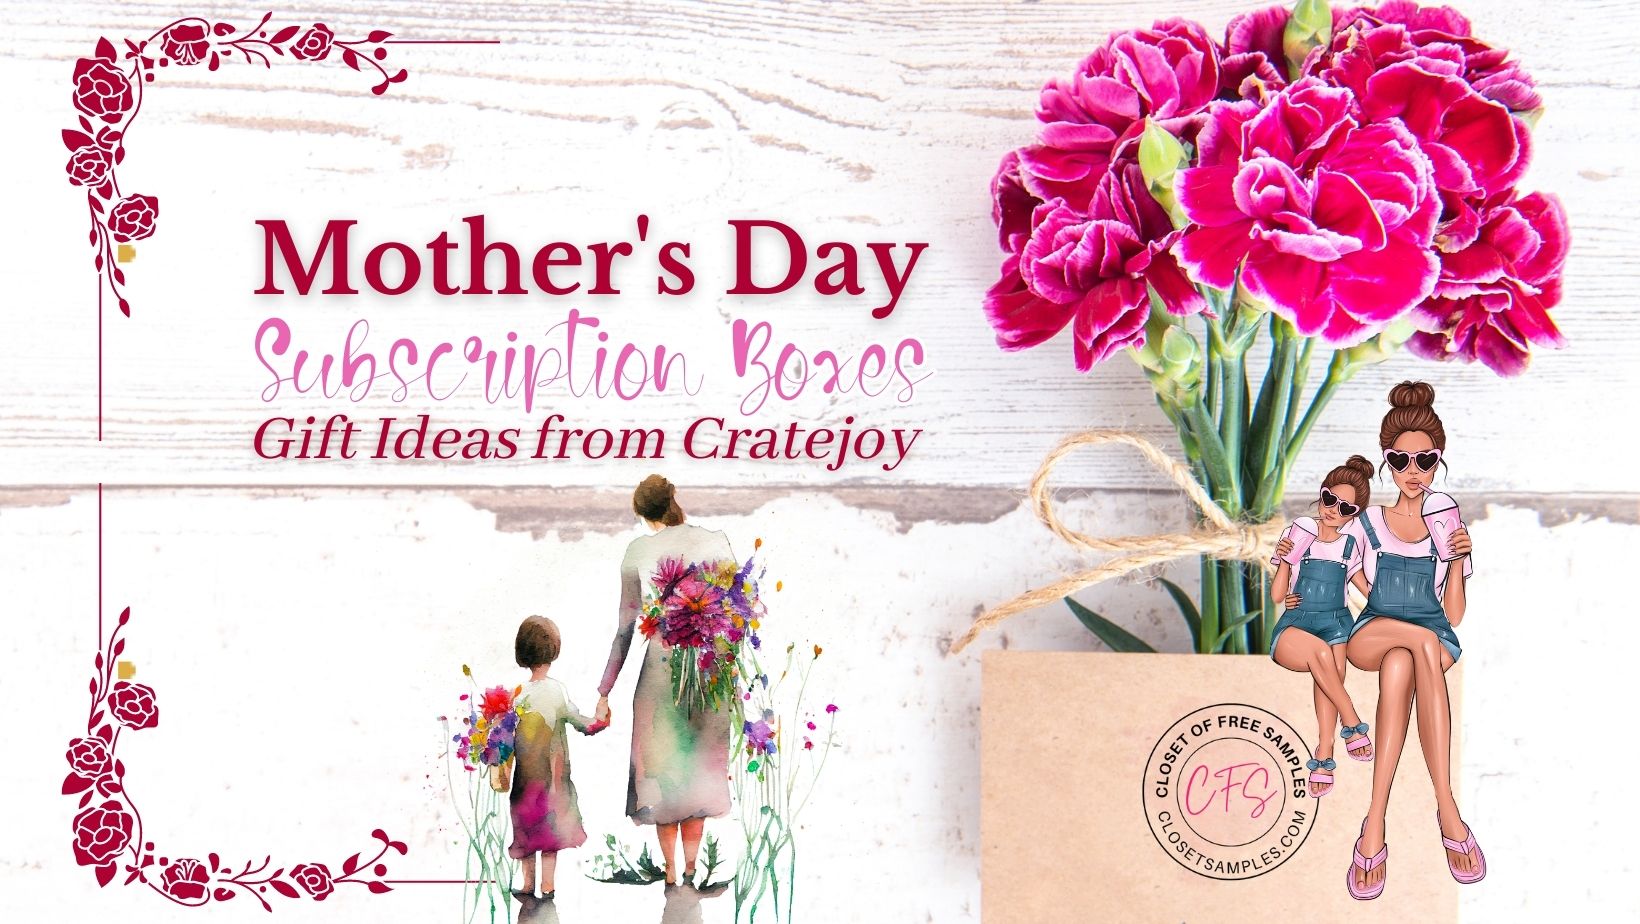 Mothers Day Subscription Box Gift Ideas from Cratejoy closetsamples